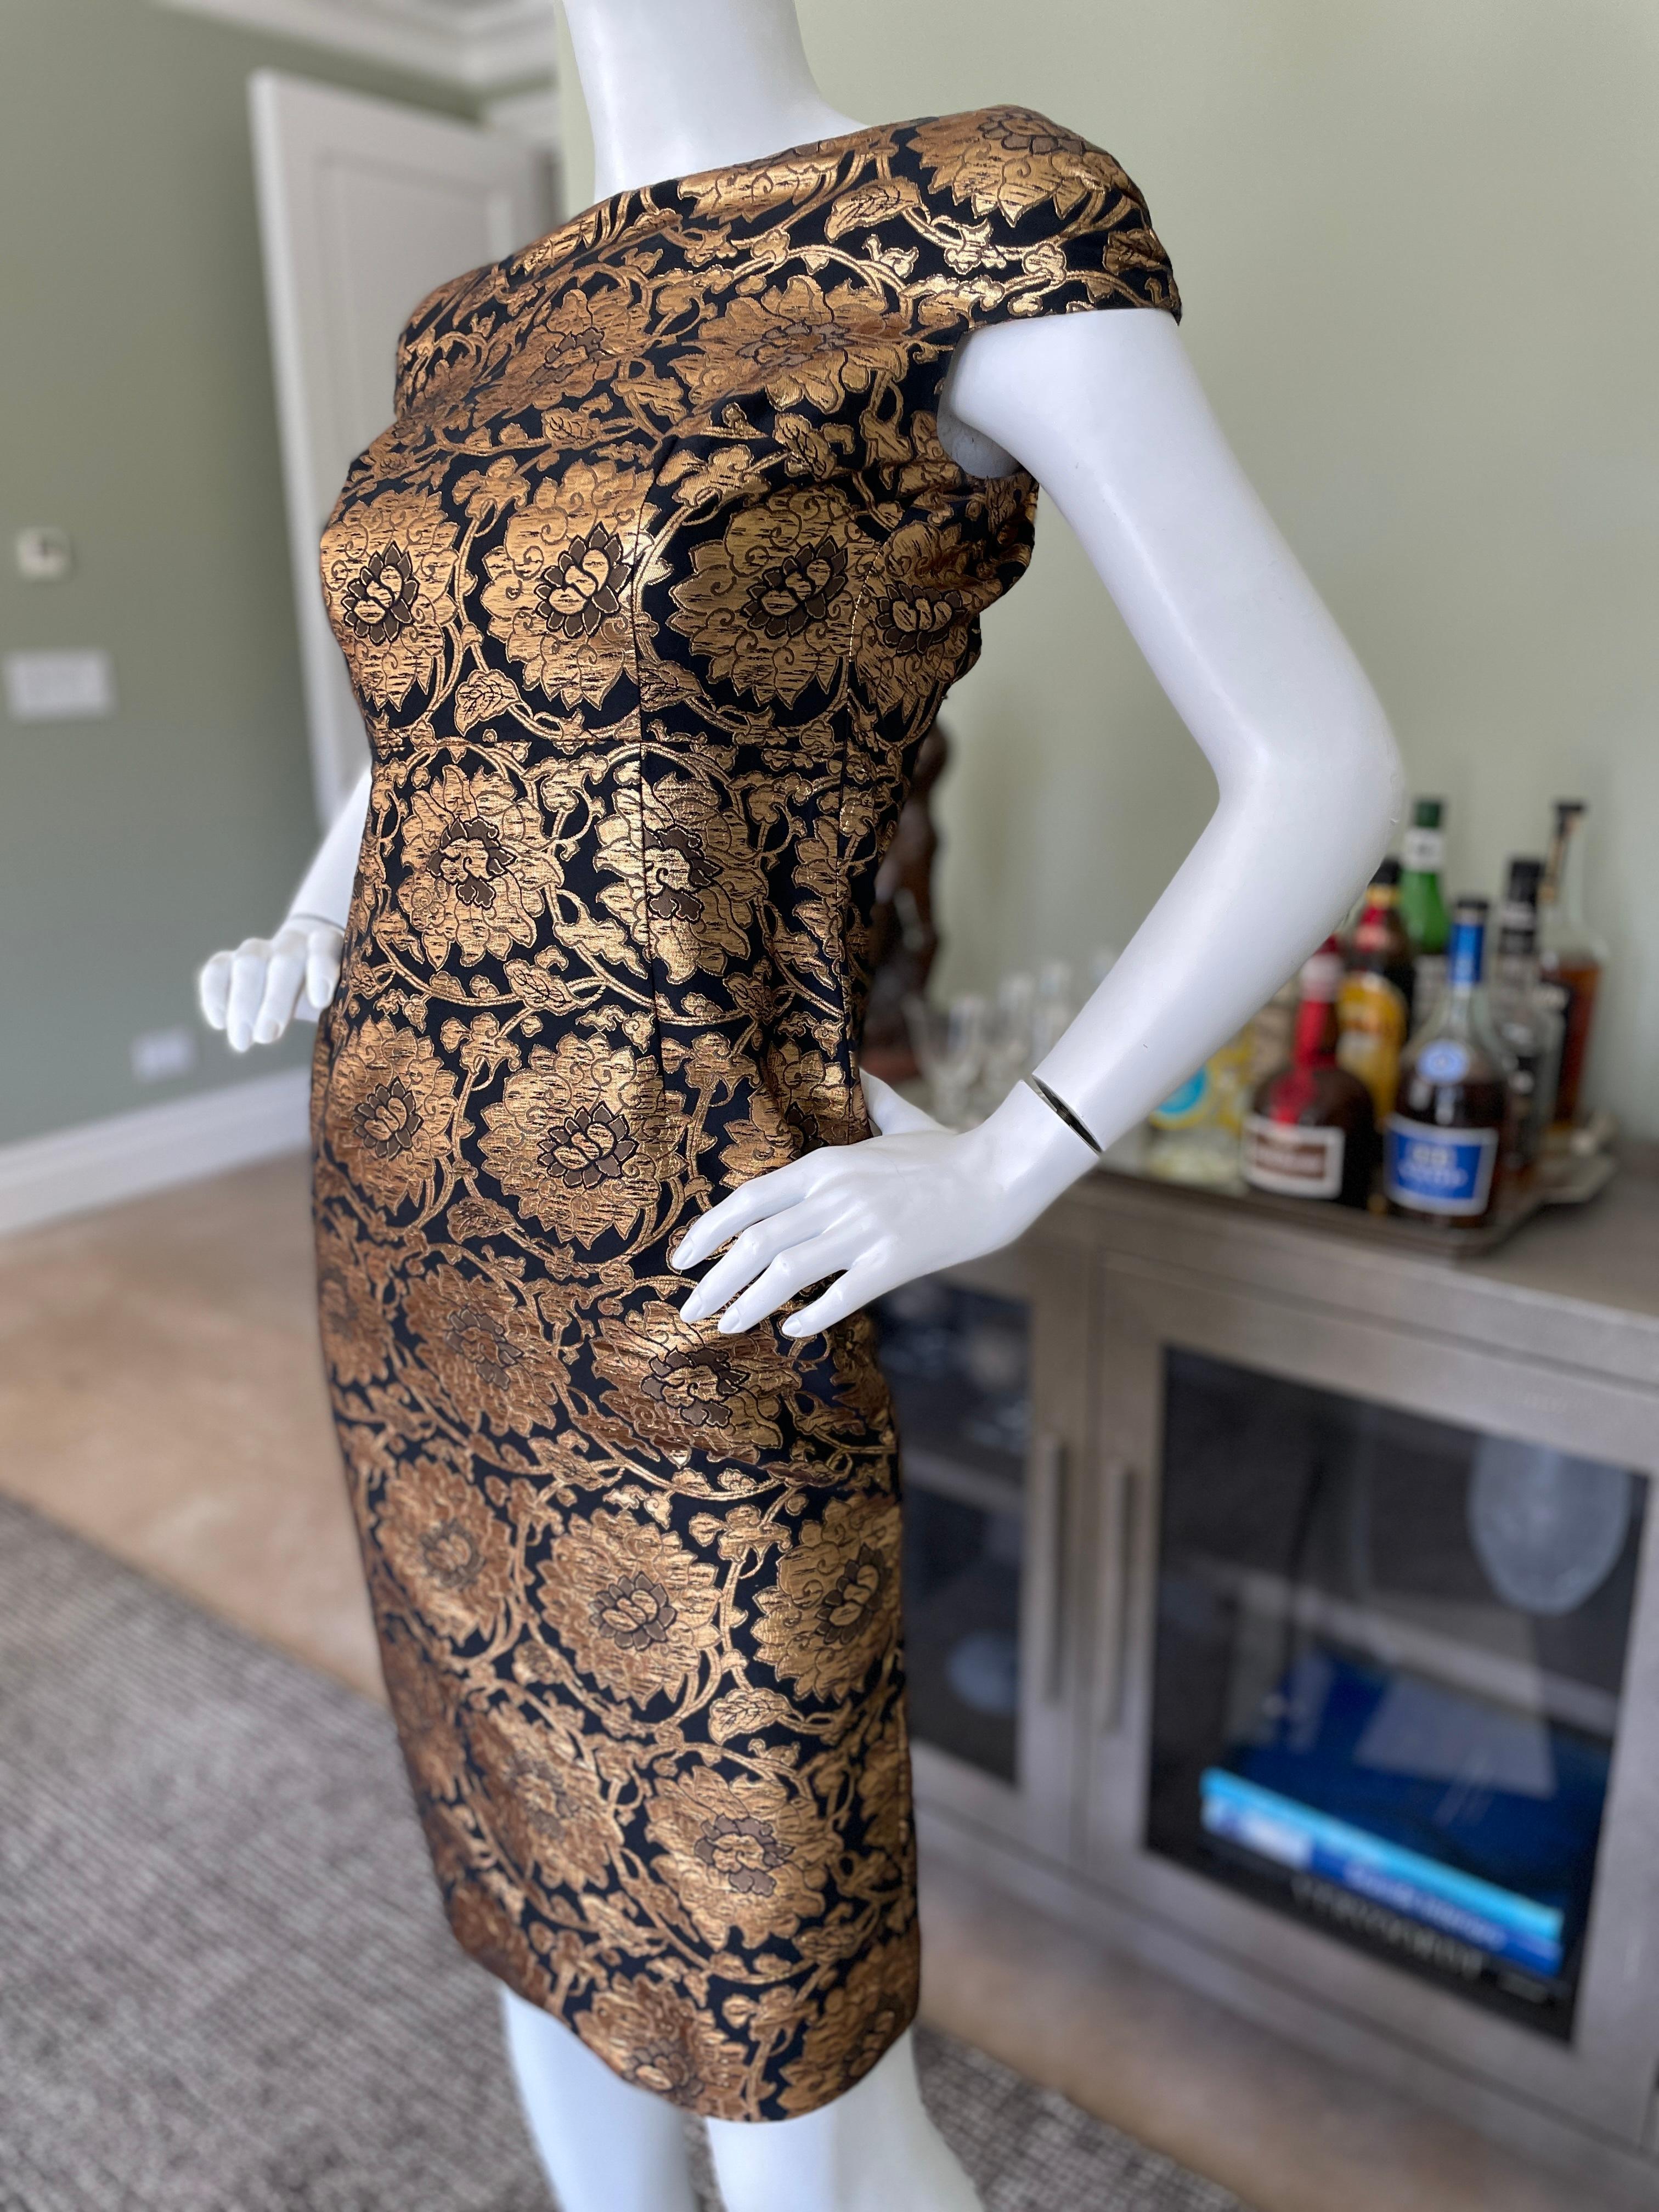 Women's Christian Dior by John Galliano Gold Brocade Cocktail Dress From Fall 2009 For Sale